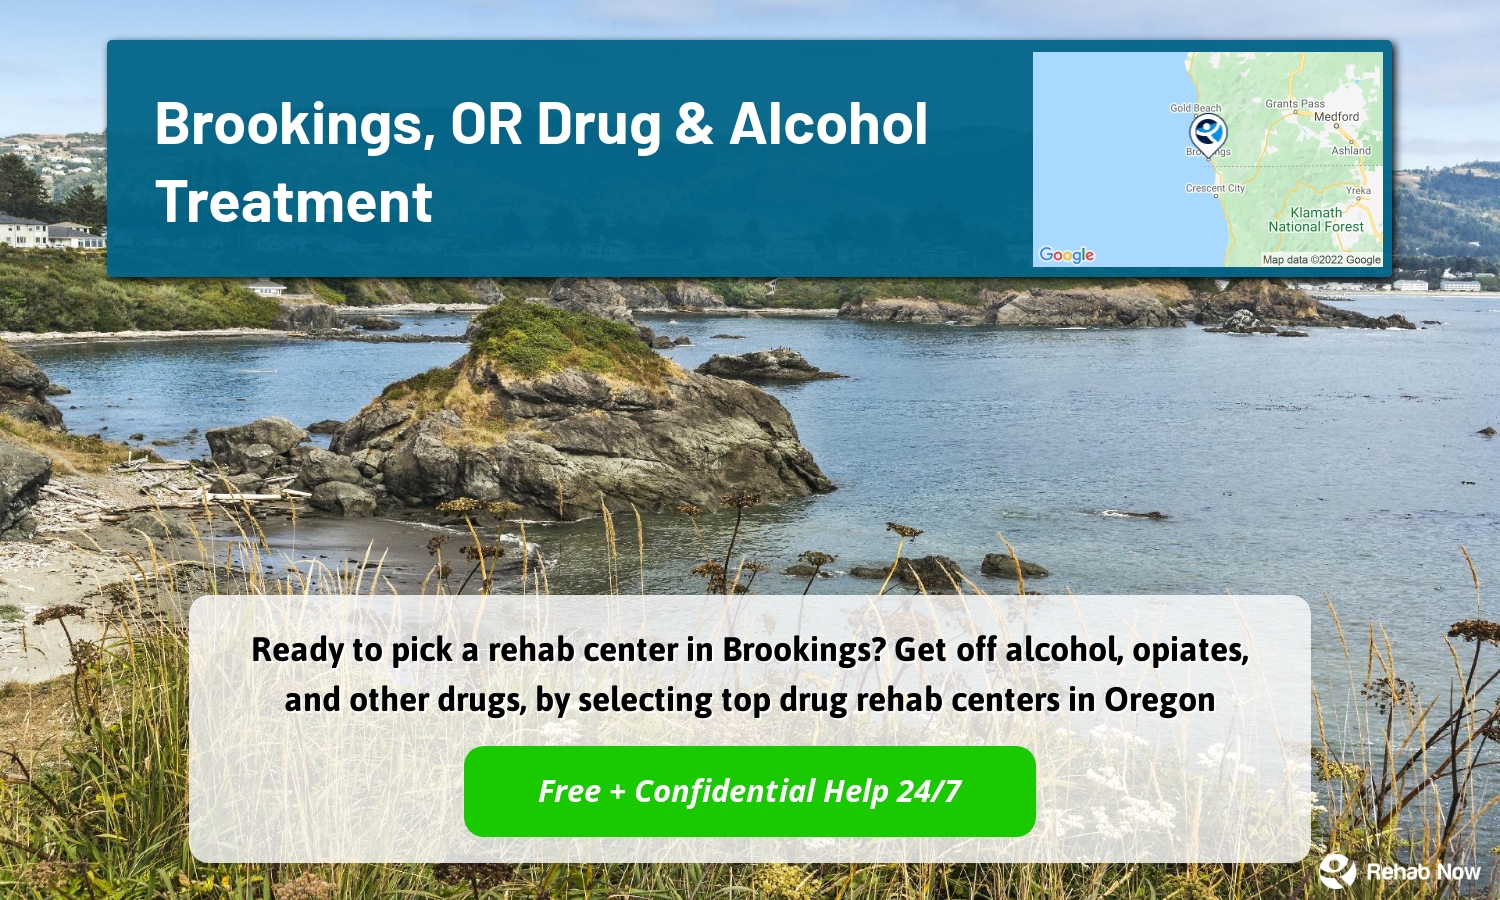 Ready to pick a rehab center in Brookings? Get off alcohol, opiates, and other drugs, by selecting top drug rehab centers in Oregon